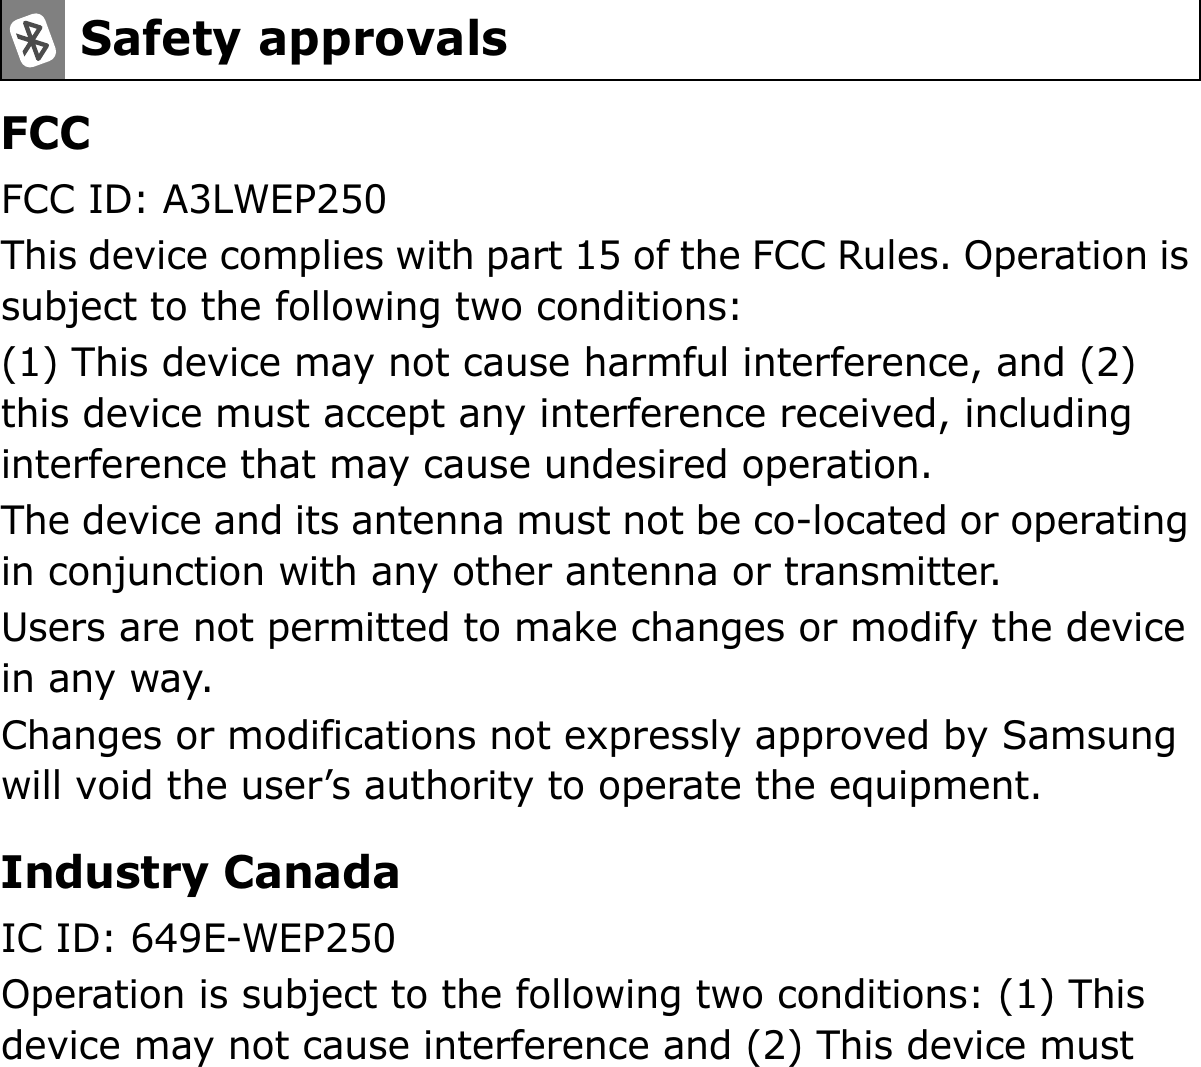 FCCFCC ID: A3LWEP250This device complies with part 15 of the FCC Rules. Operation is subject to the following two conditions:(1) This device may not cause harmful interference, and (2) this device must accept any interference received, including interference that may cause undesired operation.The device and its antenna must not be co-located or operating in conjunction with any other antenna or transmitter.Users are not permitted to make changes or modify the device in any way. Changes or modifications not expressly approved by Samsung will void the user’s authority to operate the equipment.Industry CanadaIC ID: 649E-WEP250Operation is subject to the following two conditions: (1) This device may not cause interference and (2) This device must Safety approvals